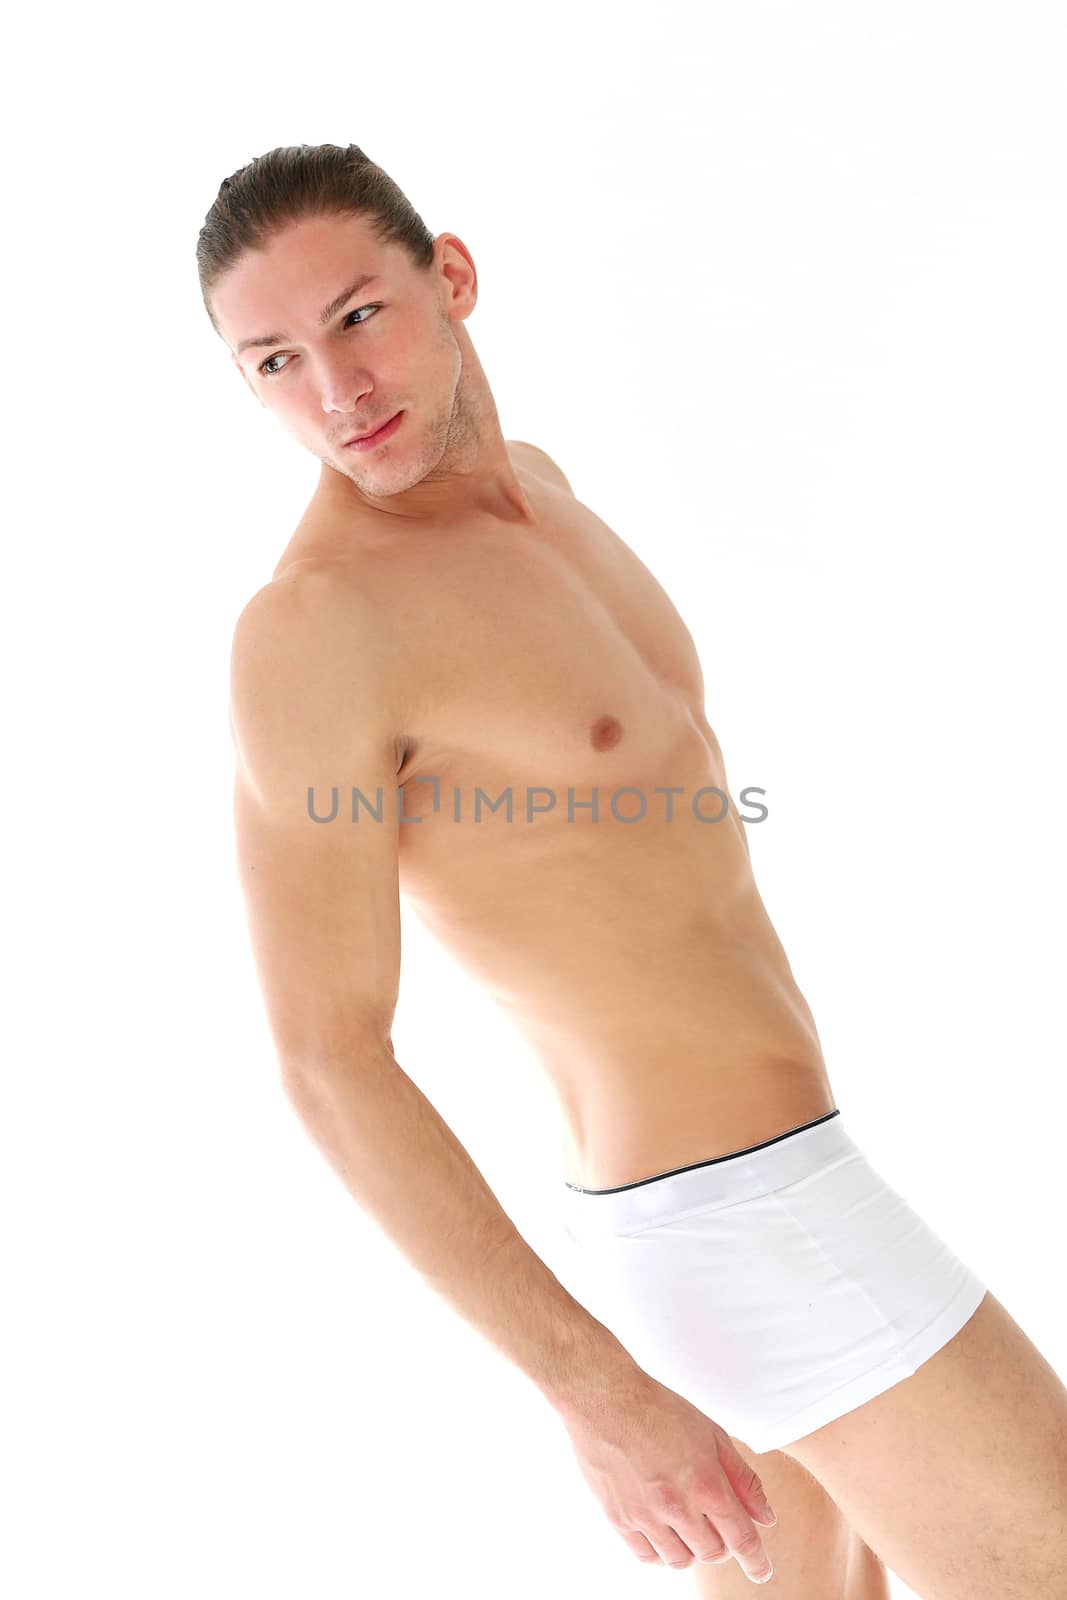 Portrait of a handsome shirtless man who is working out and posing over a white background